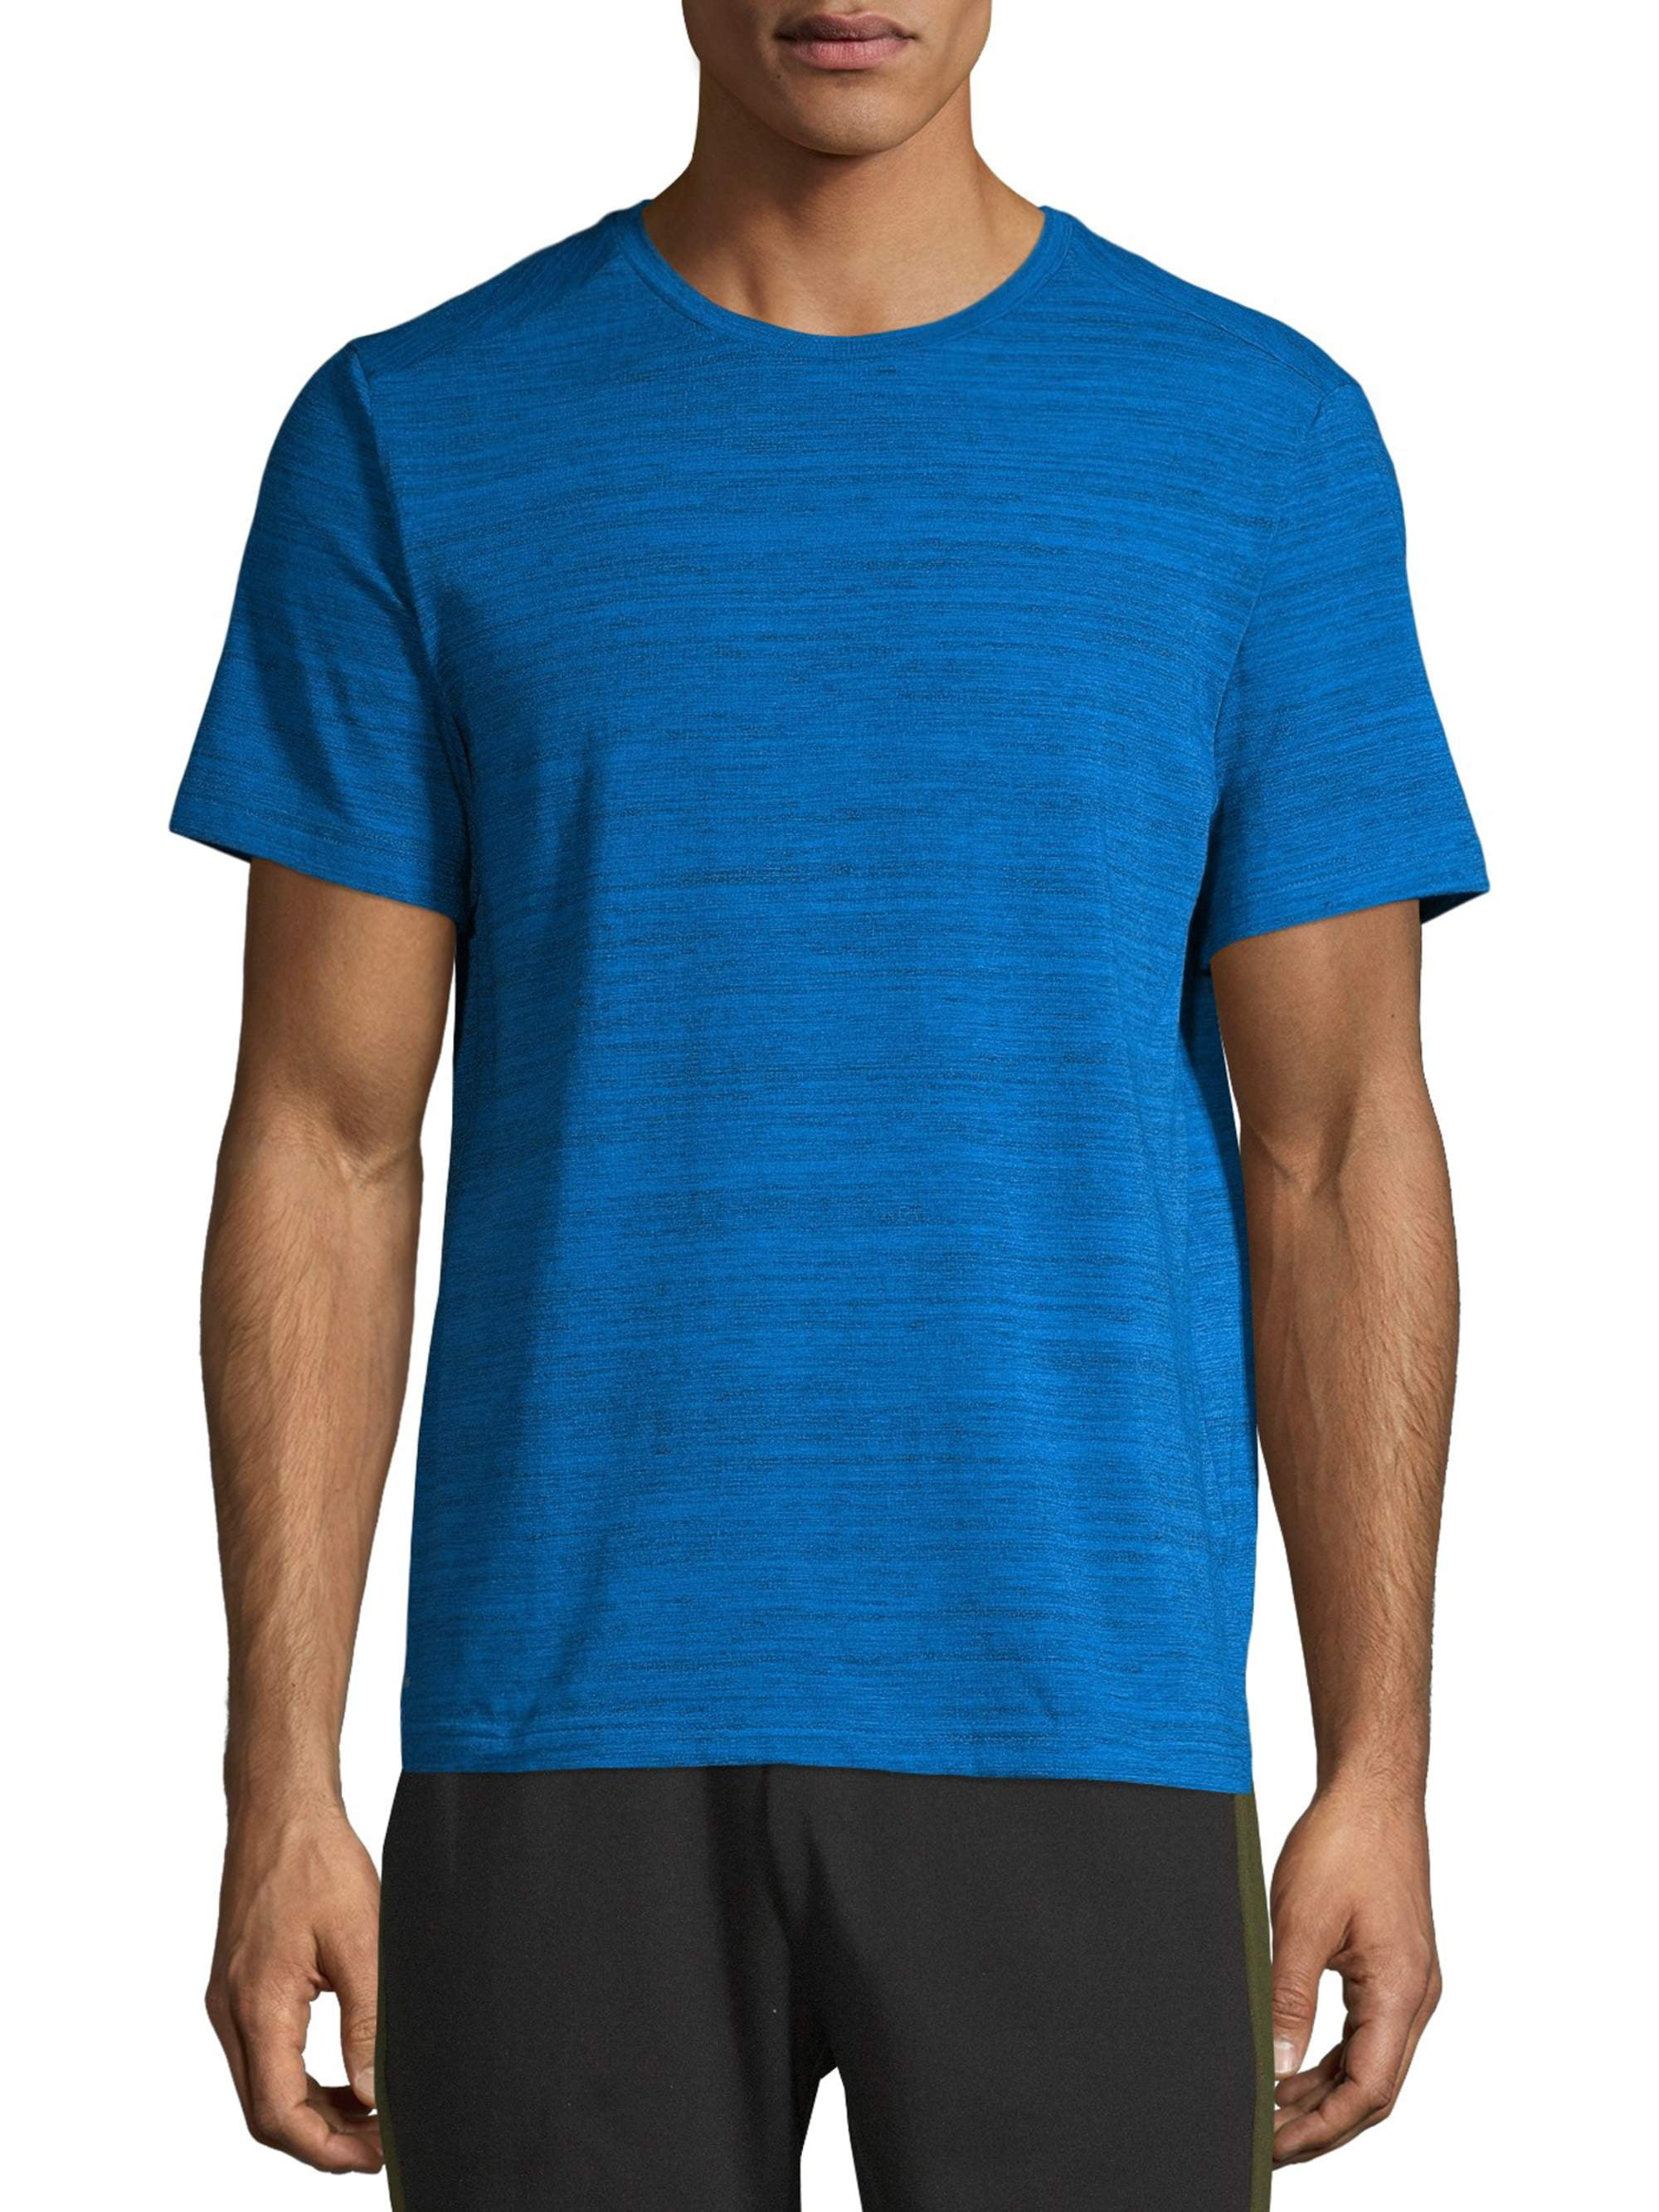 Athletic Works Men's and Big Men's Tri Blend Active T-Shirt, up to 5XL ...